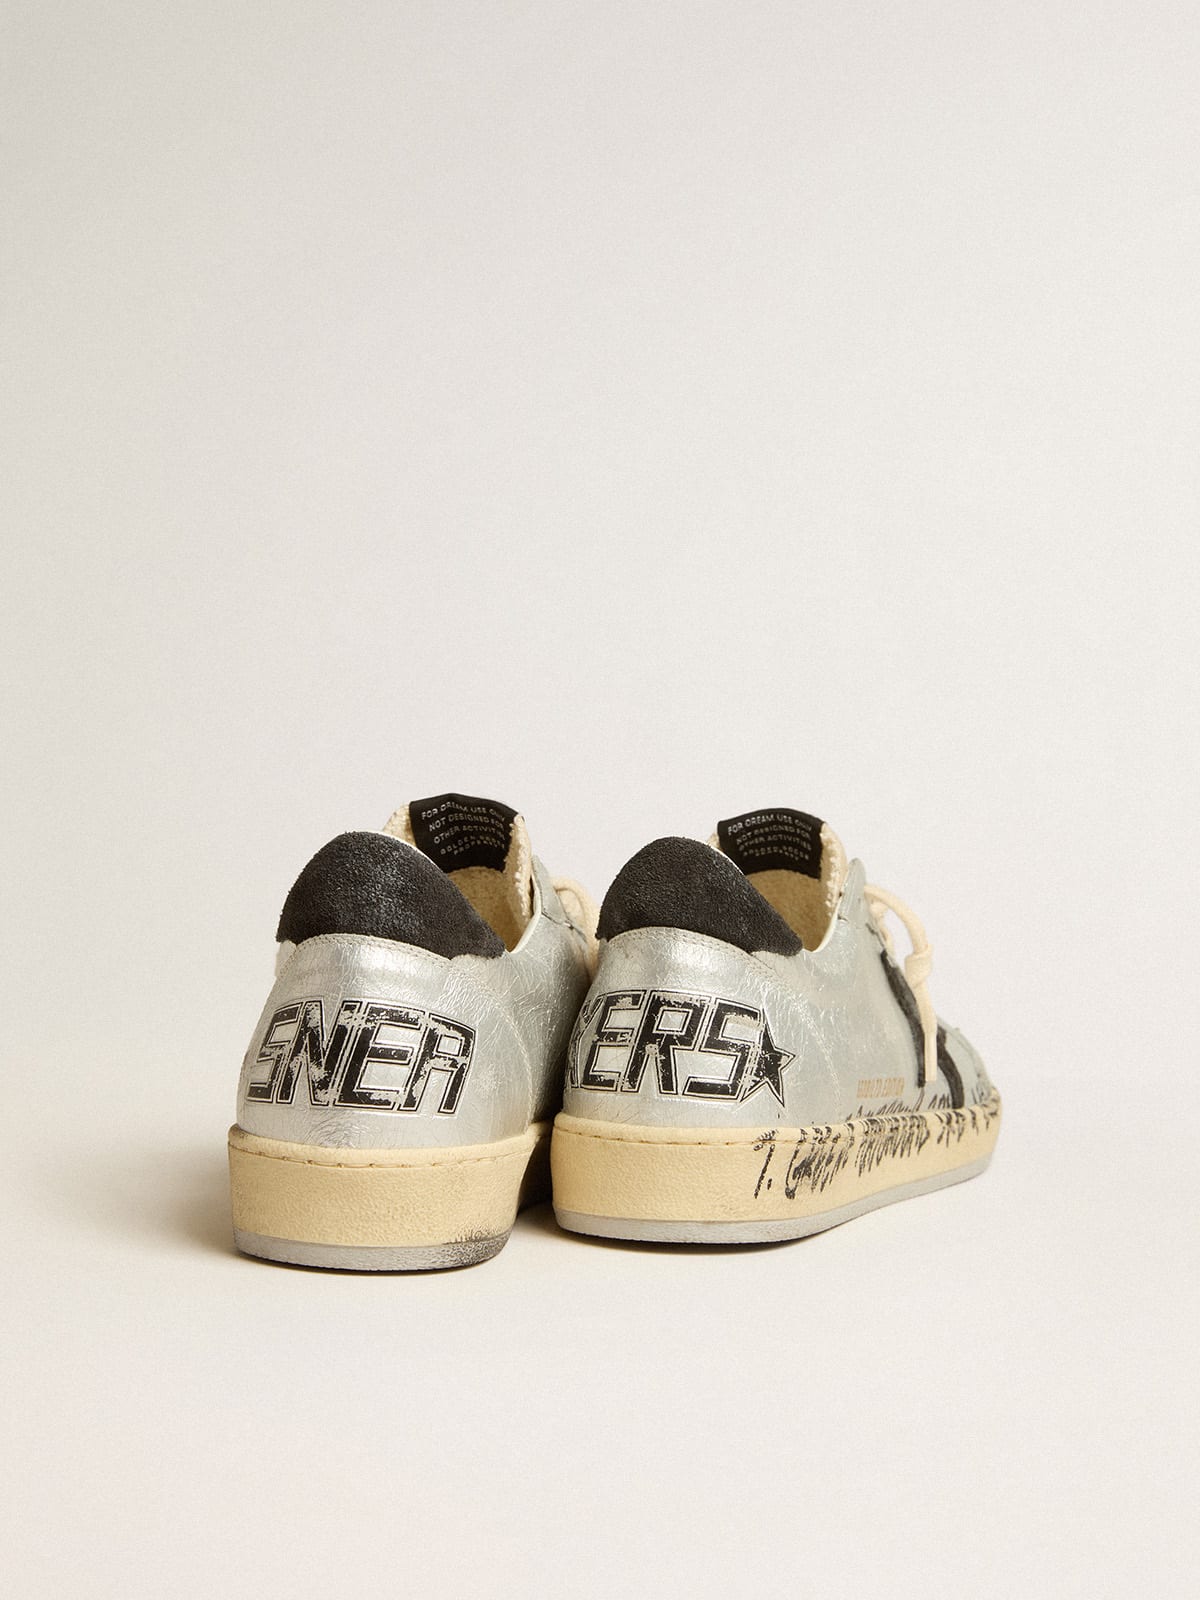 Golden Goose - Ball Star LTD in silver leather with gray suede star and heel tab in 